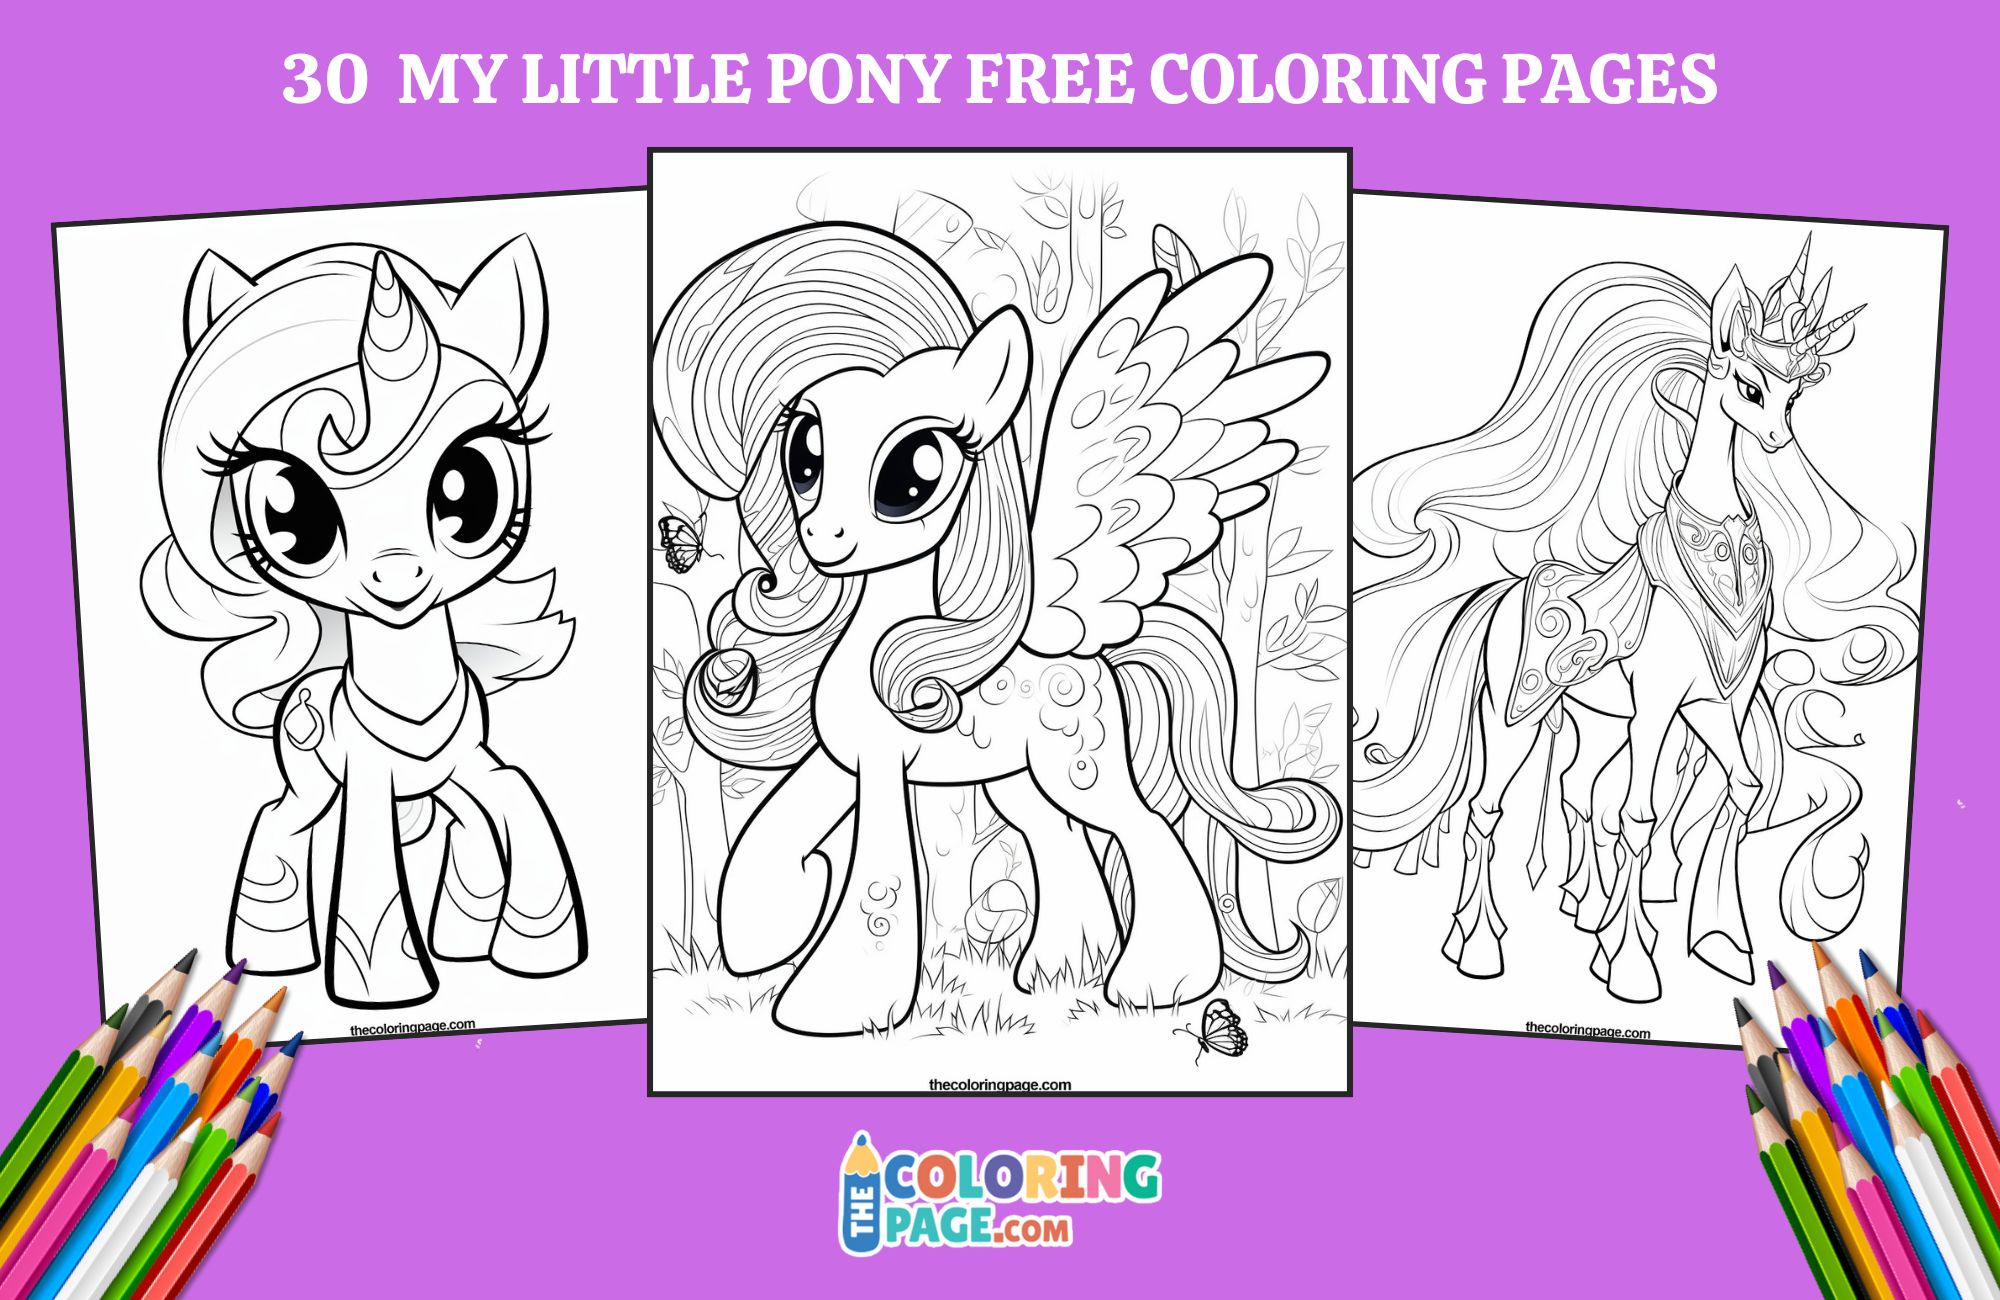 30 Free My Little Pony Coloring Pages For Kids